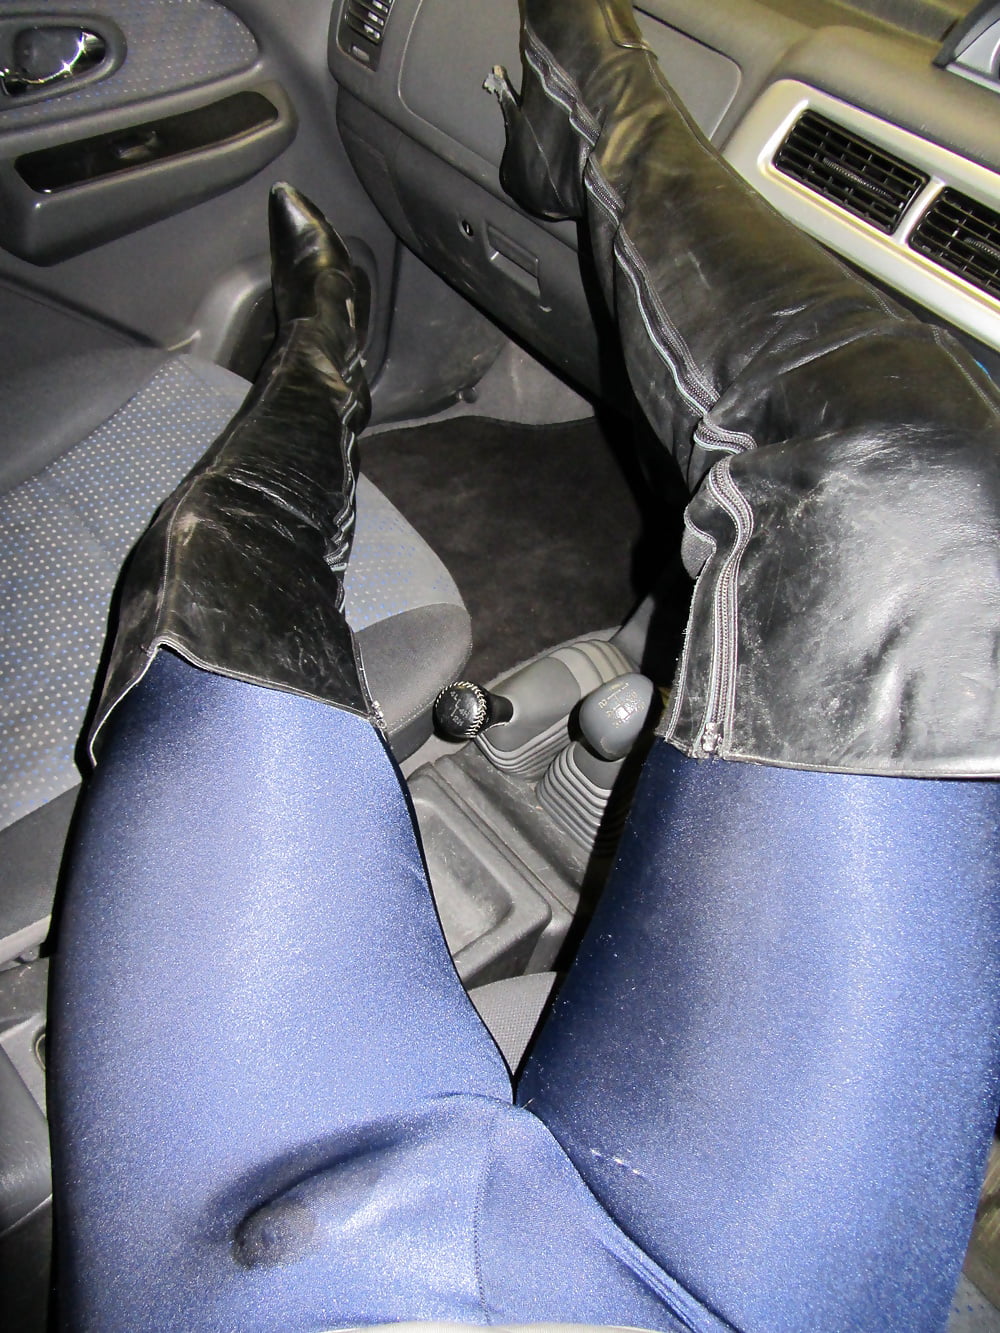 Boots in car adult photos